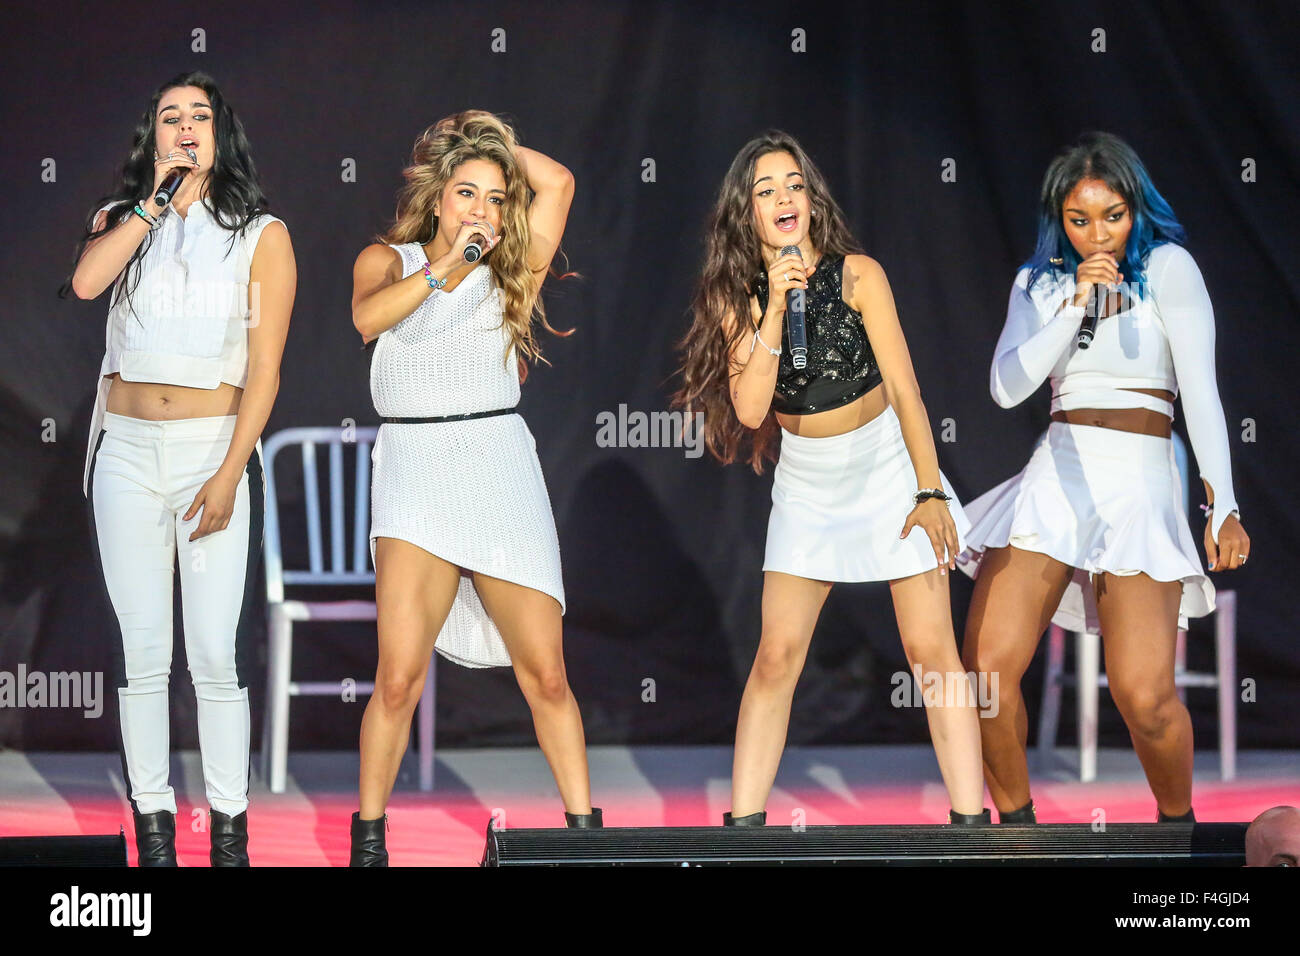 Music Artist FIFTH HARMONY performs at the White Oak Amphitheater in North Carolina.   Fifth Harmony is an American girl group formed on the second season of The X Factor. The group consists of members Ally Brooke Hernandez, Normani Hamilton, Dinah Jane Hansen, Camila Cabello, and Lauren Jauregui. Stock Photo